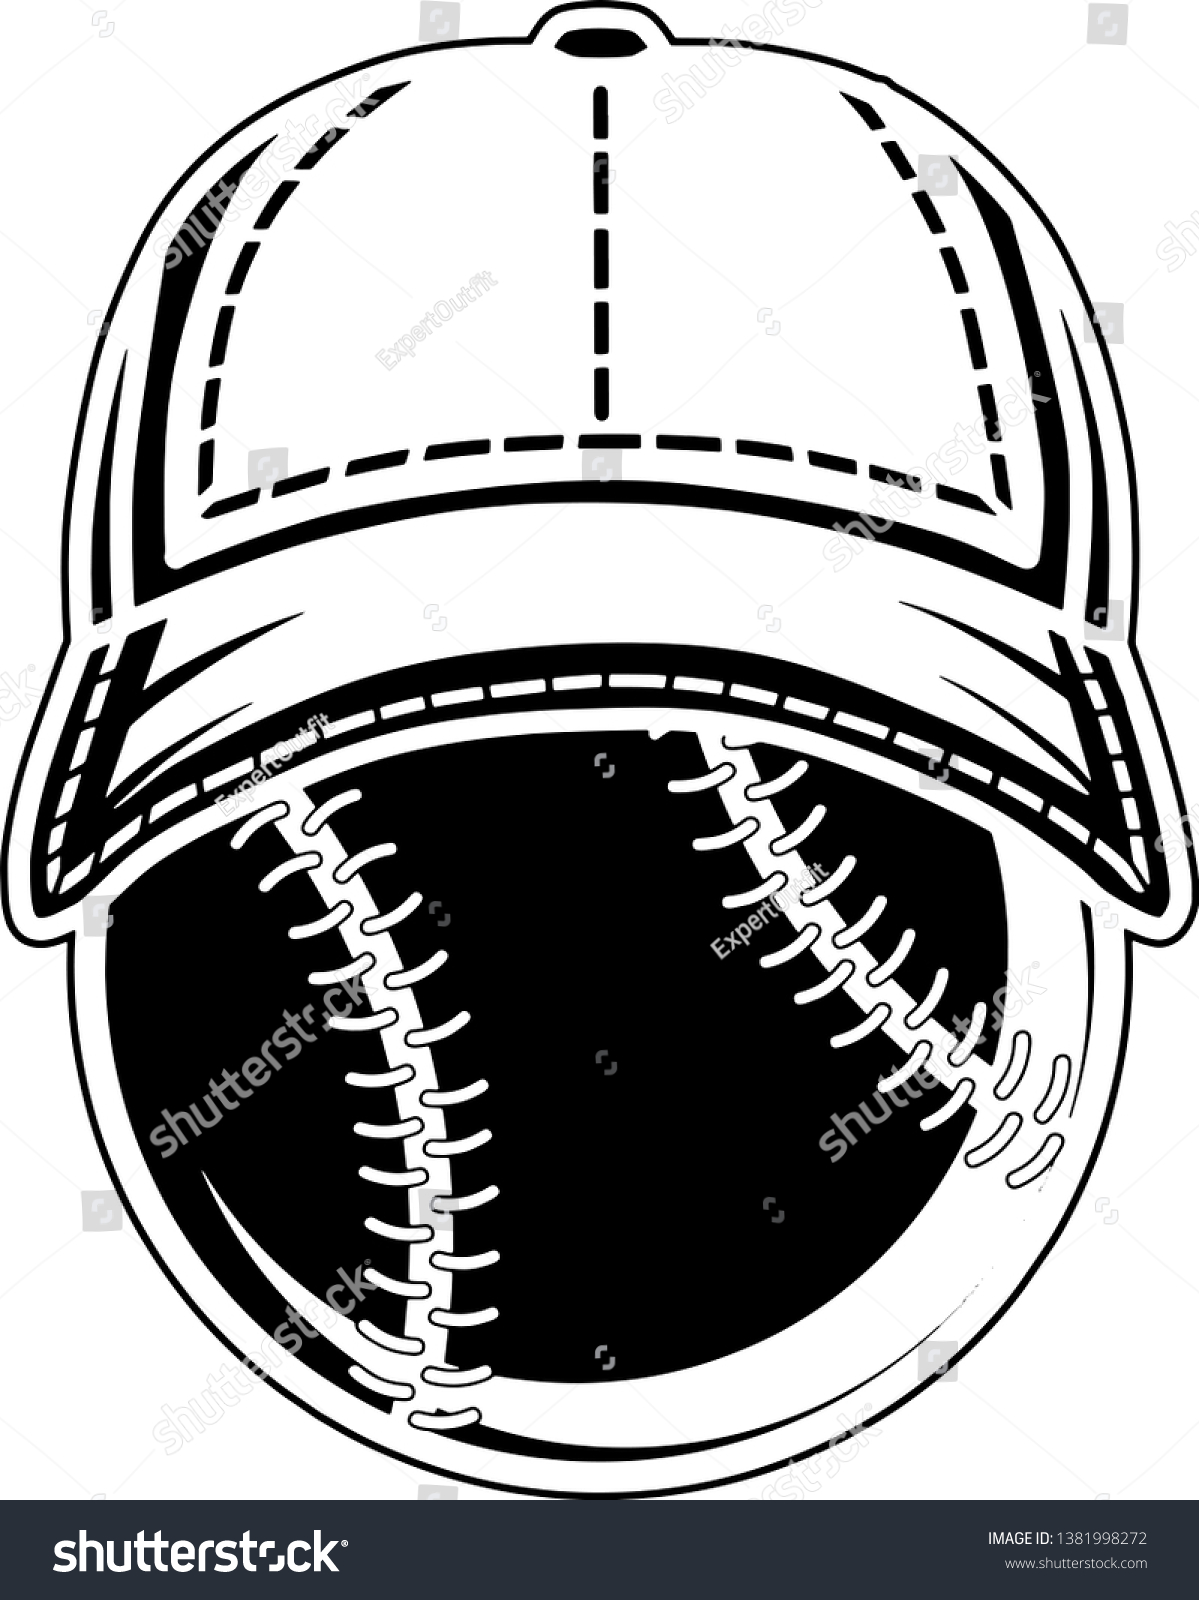 SVG of Baseball Ball With Stitching Wearing Sports Cap With Stitches svg